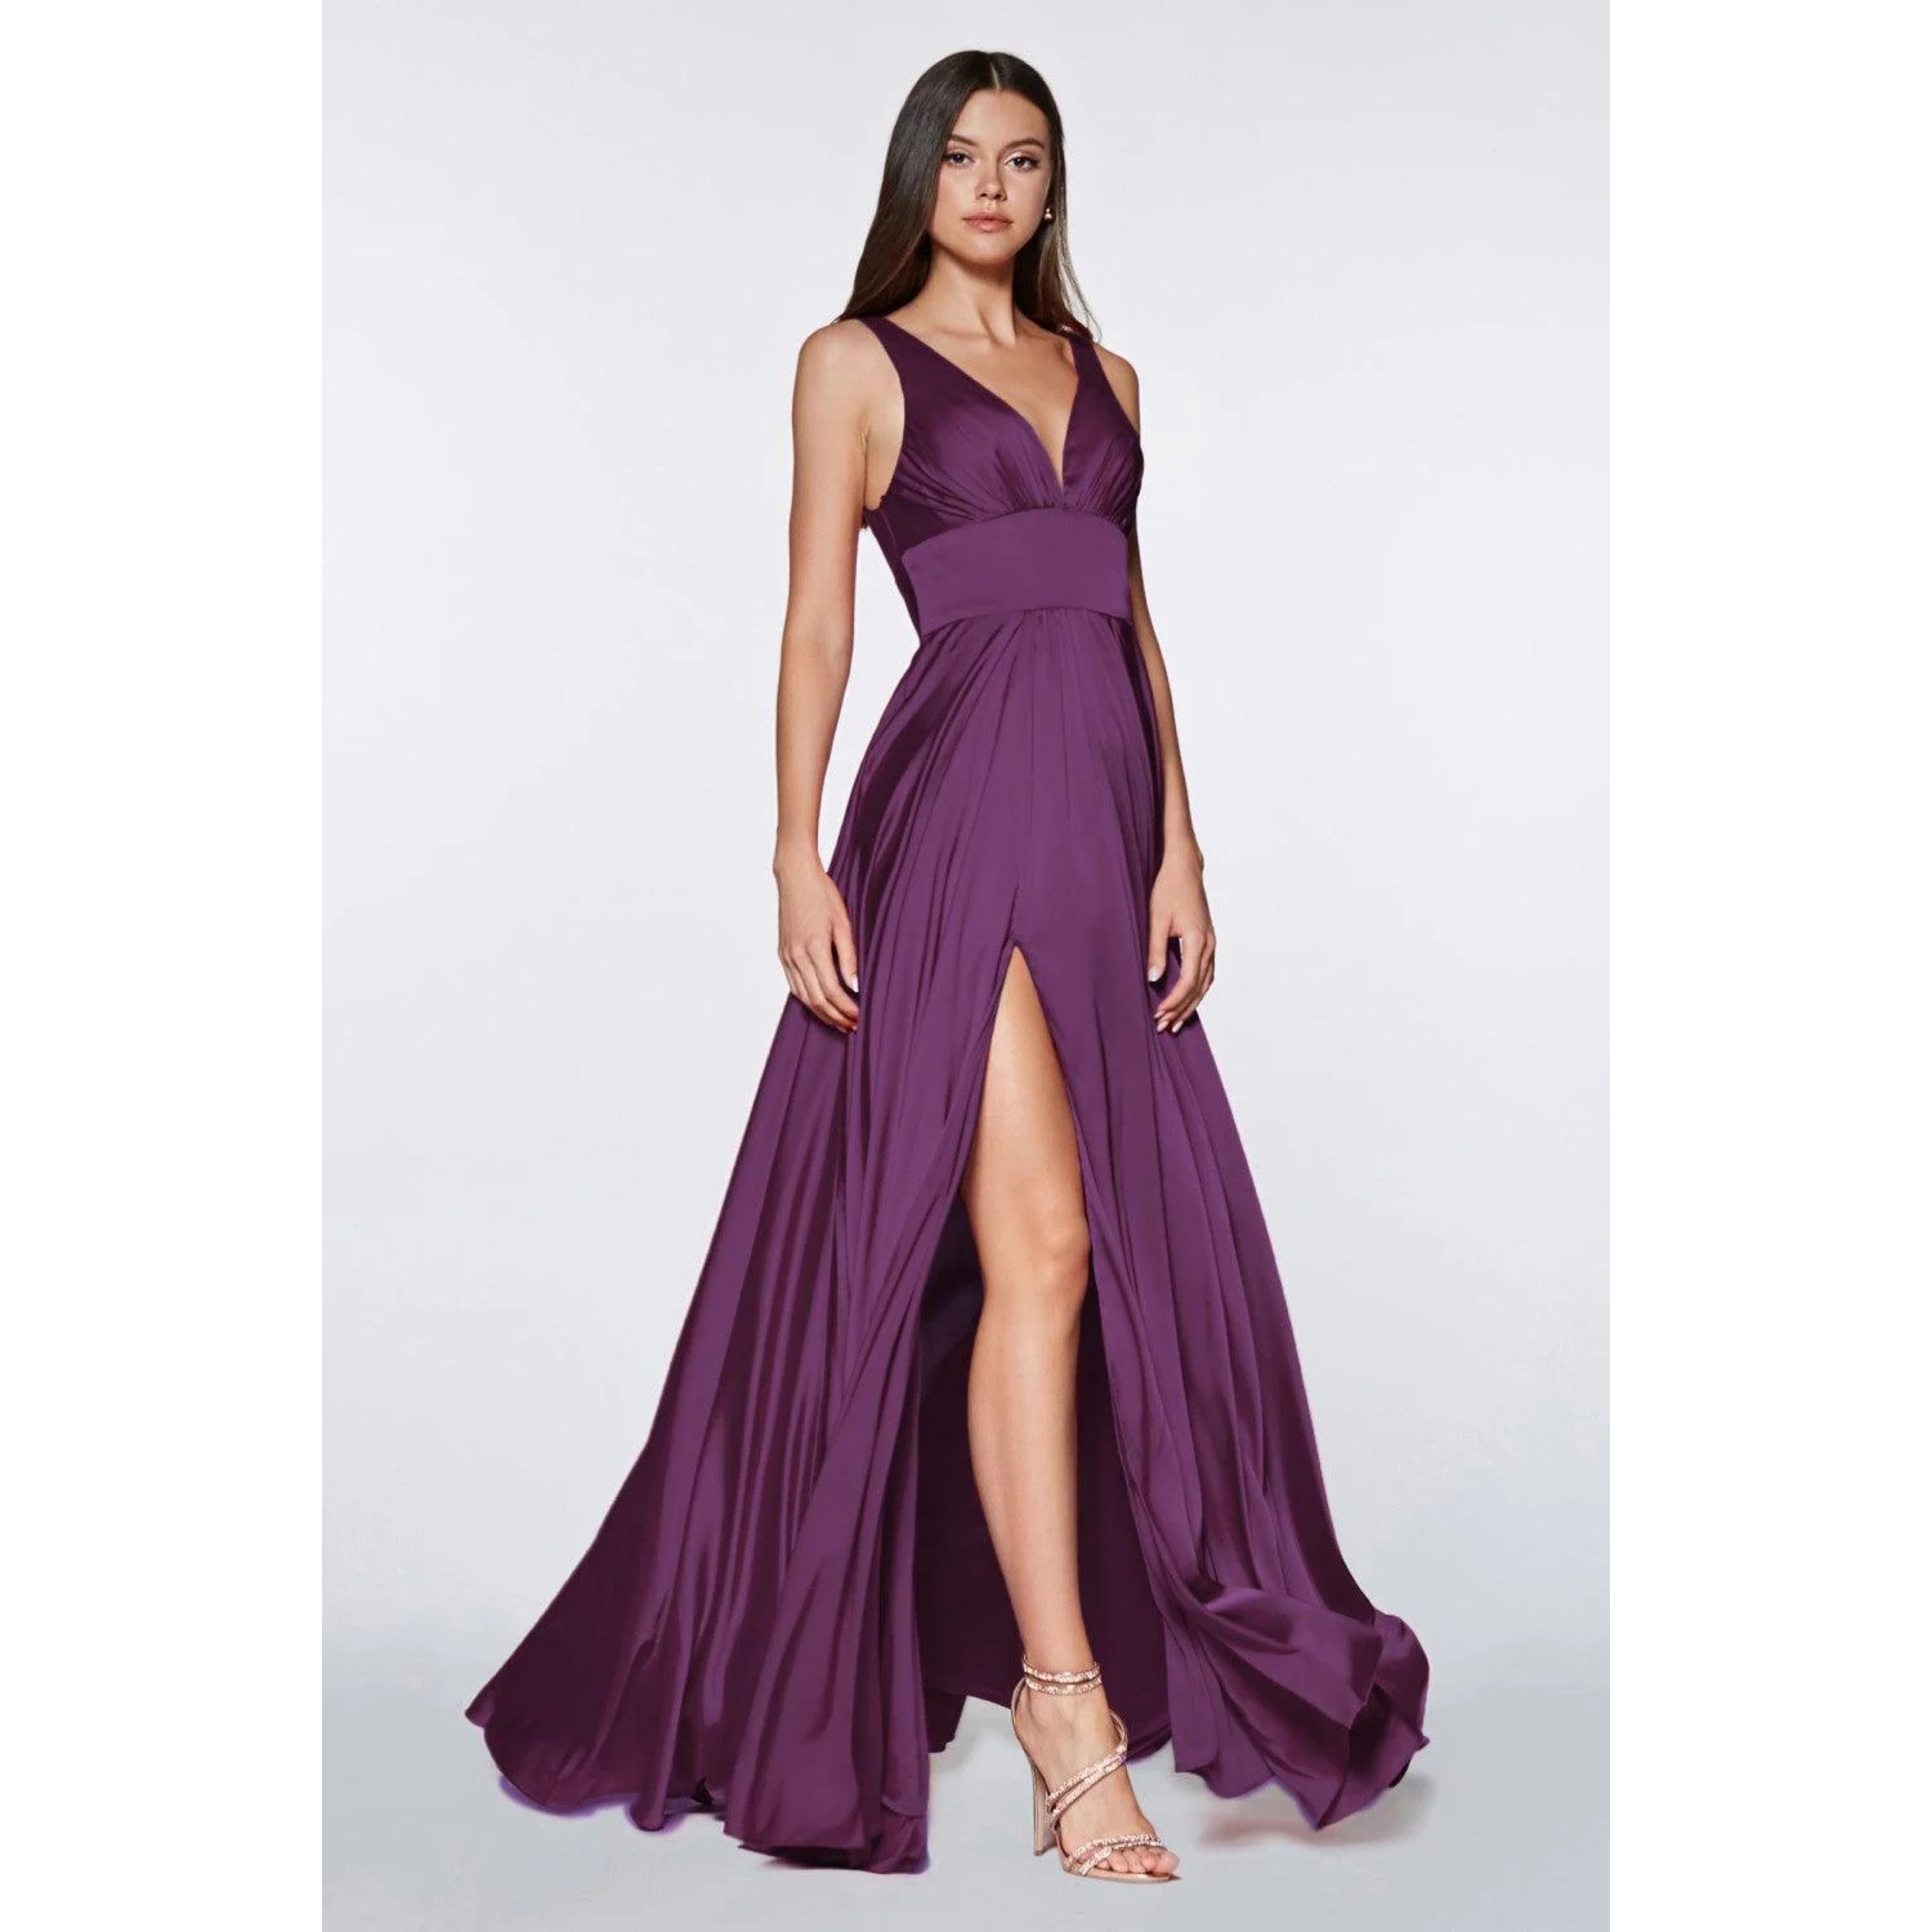 LaDivine eggplant satin dress, size 2, NEW WITH TAGS!